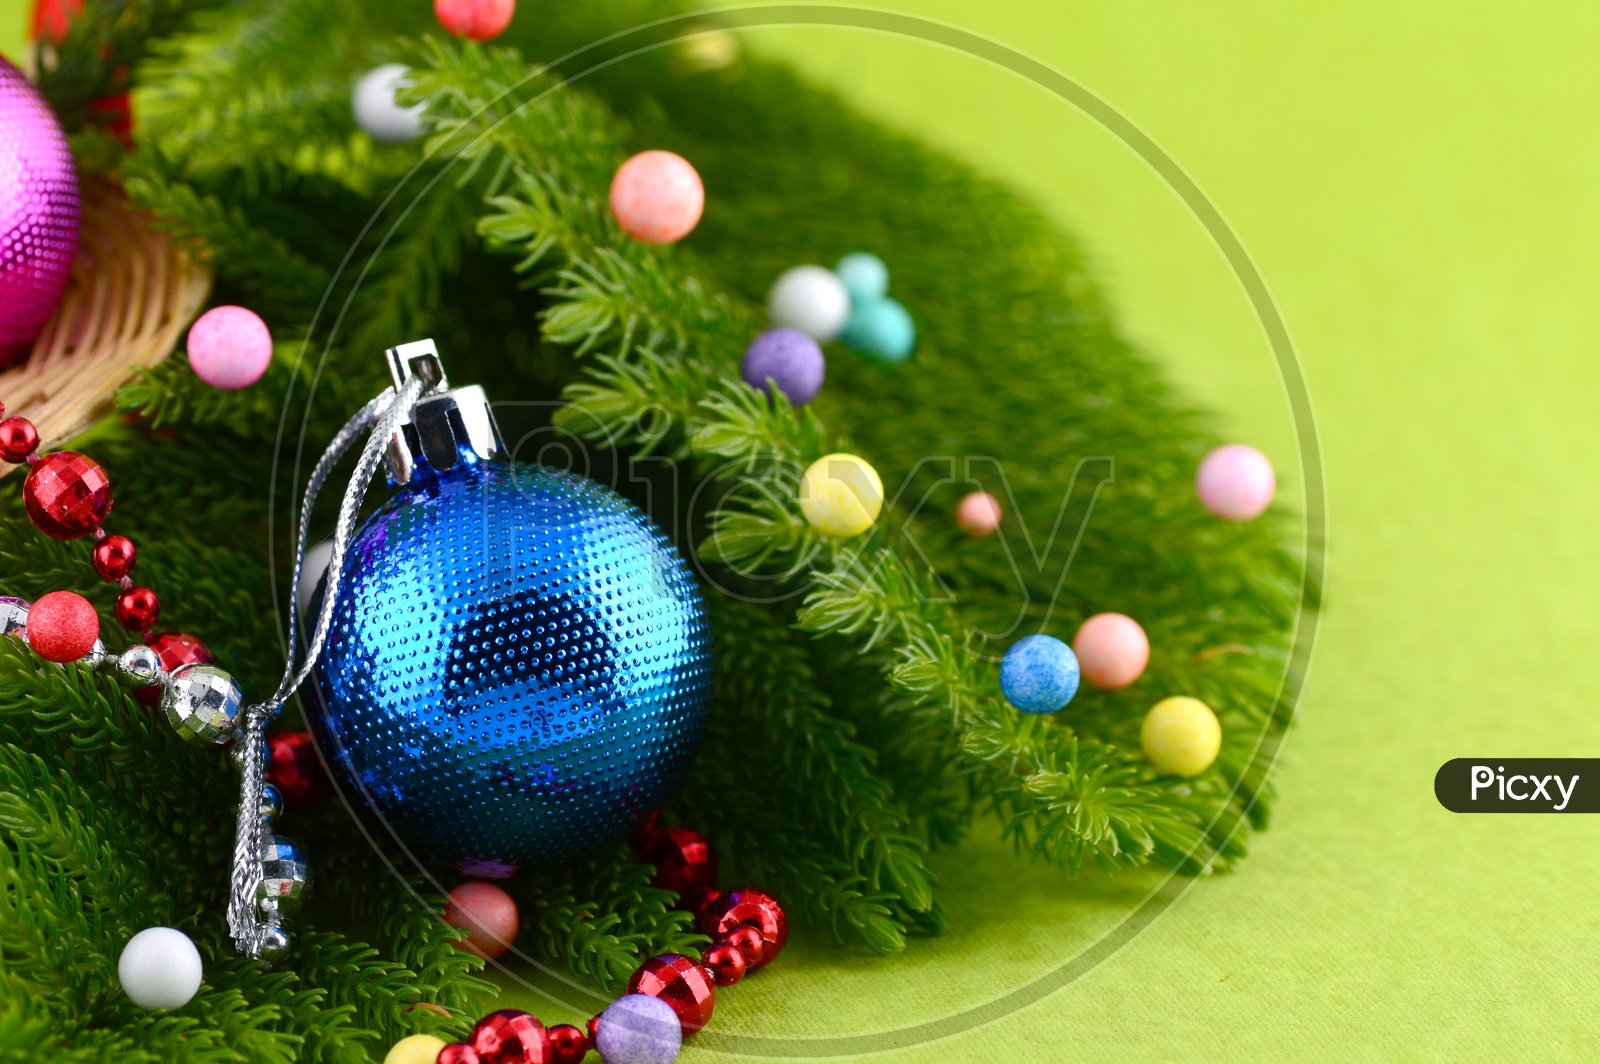 Christmas Decoration: Christmas ball and ornaments with the branch of Christmas tree